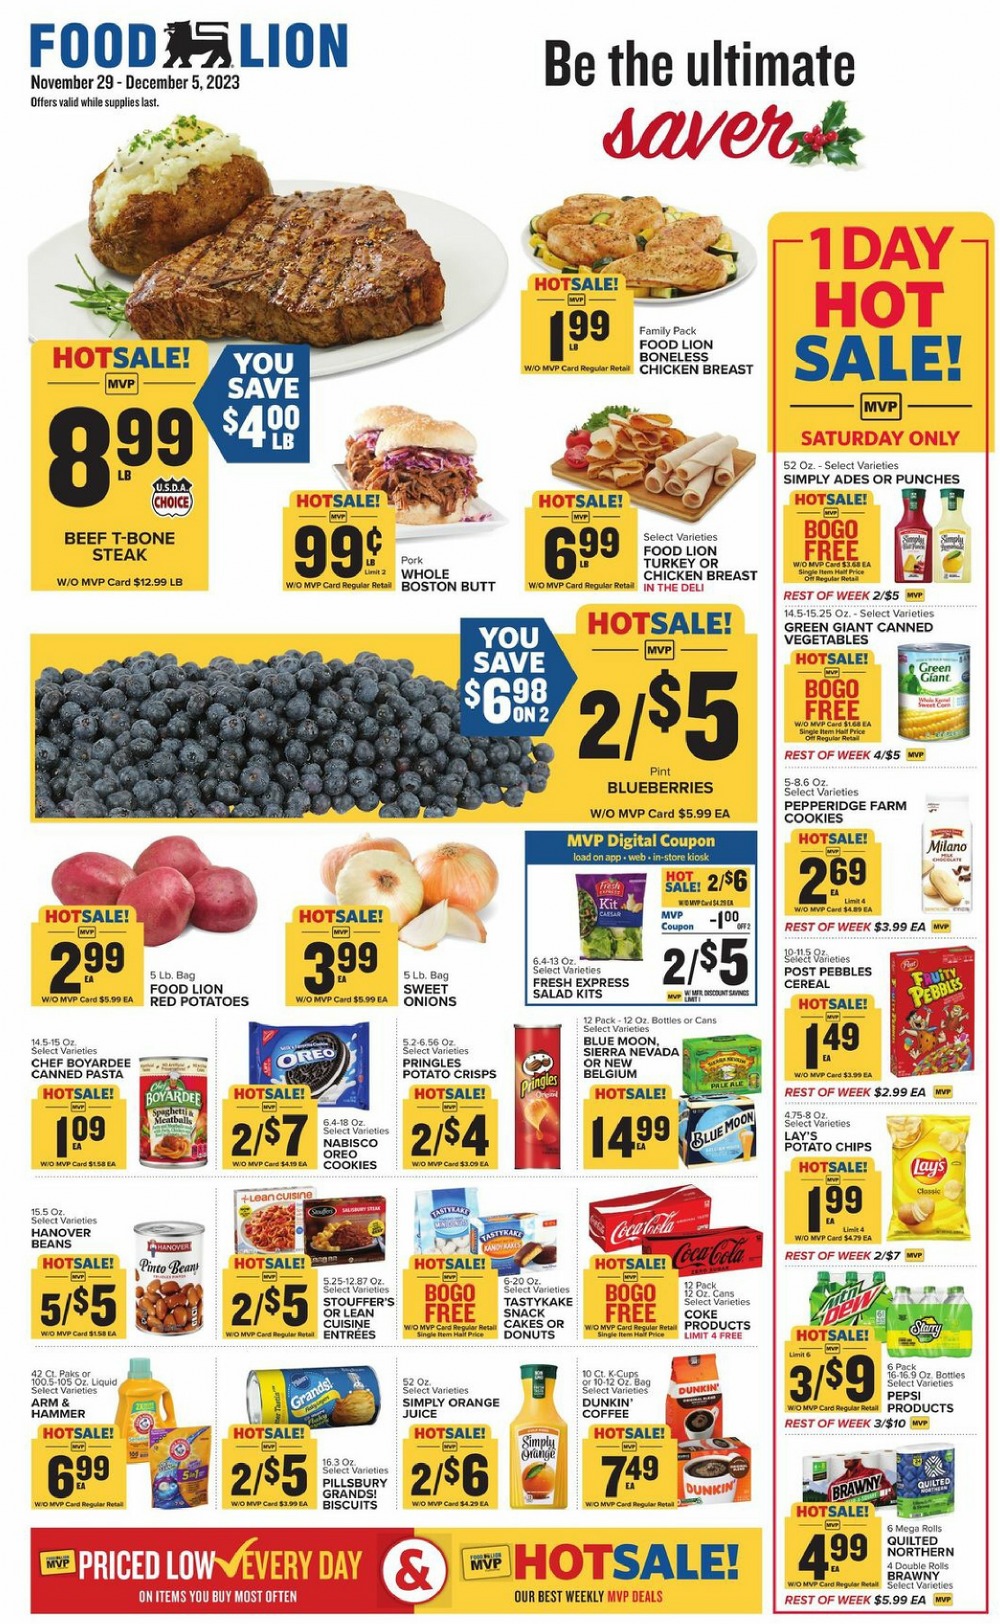 Food Lion Weekly Ad November 29 to December 5, 2023 1 – food lion ad 1 2